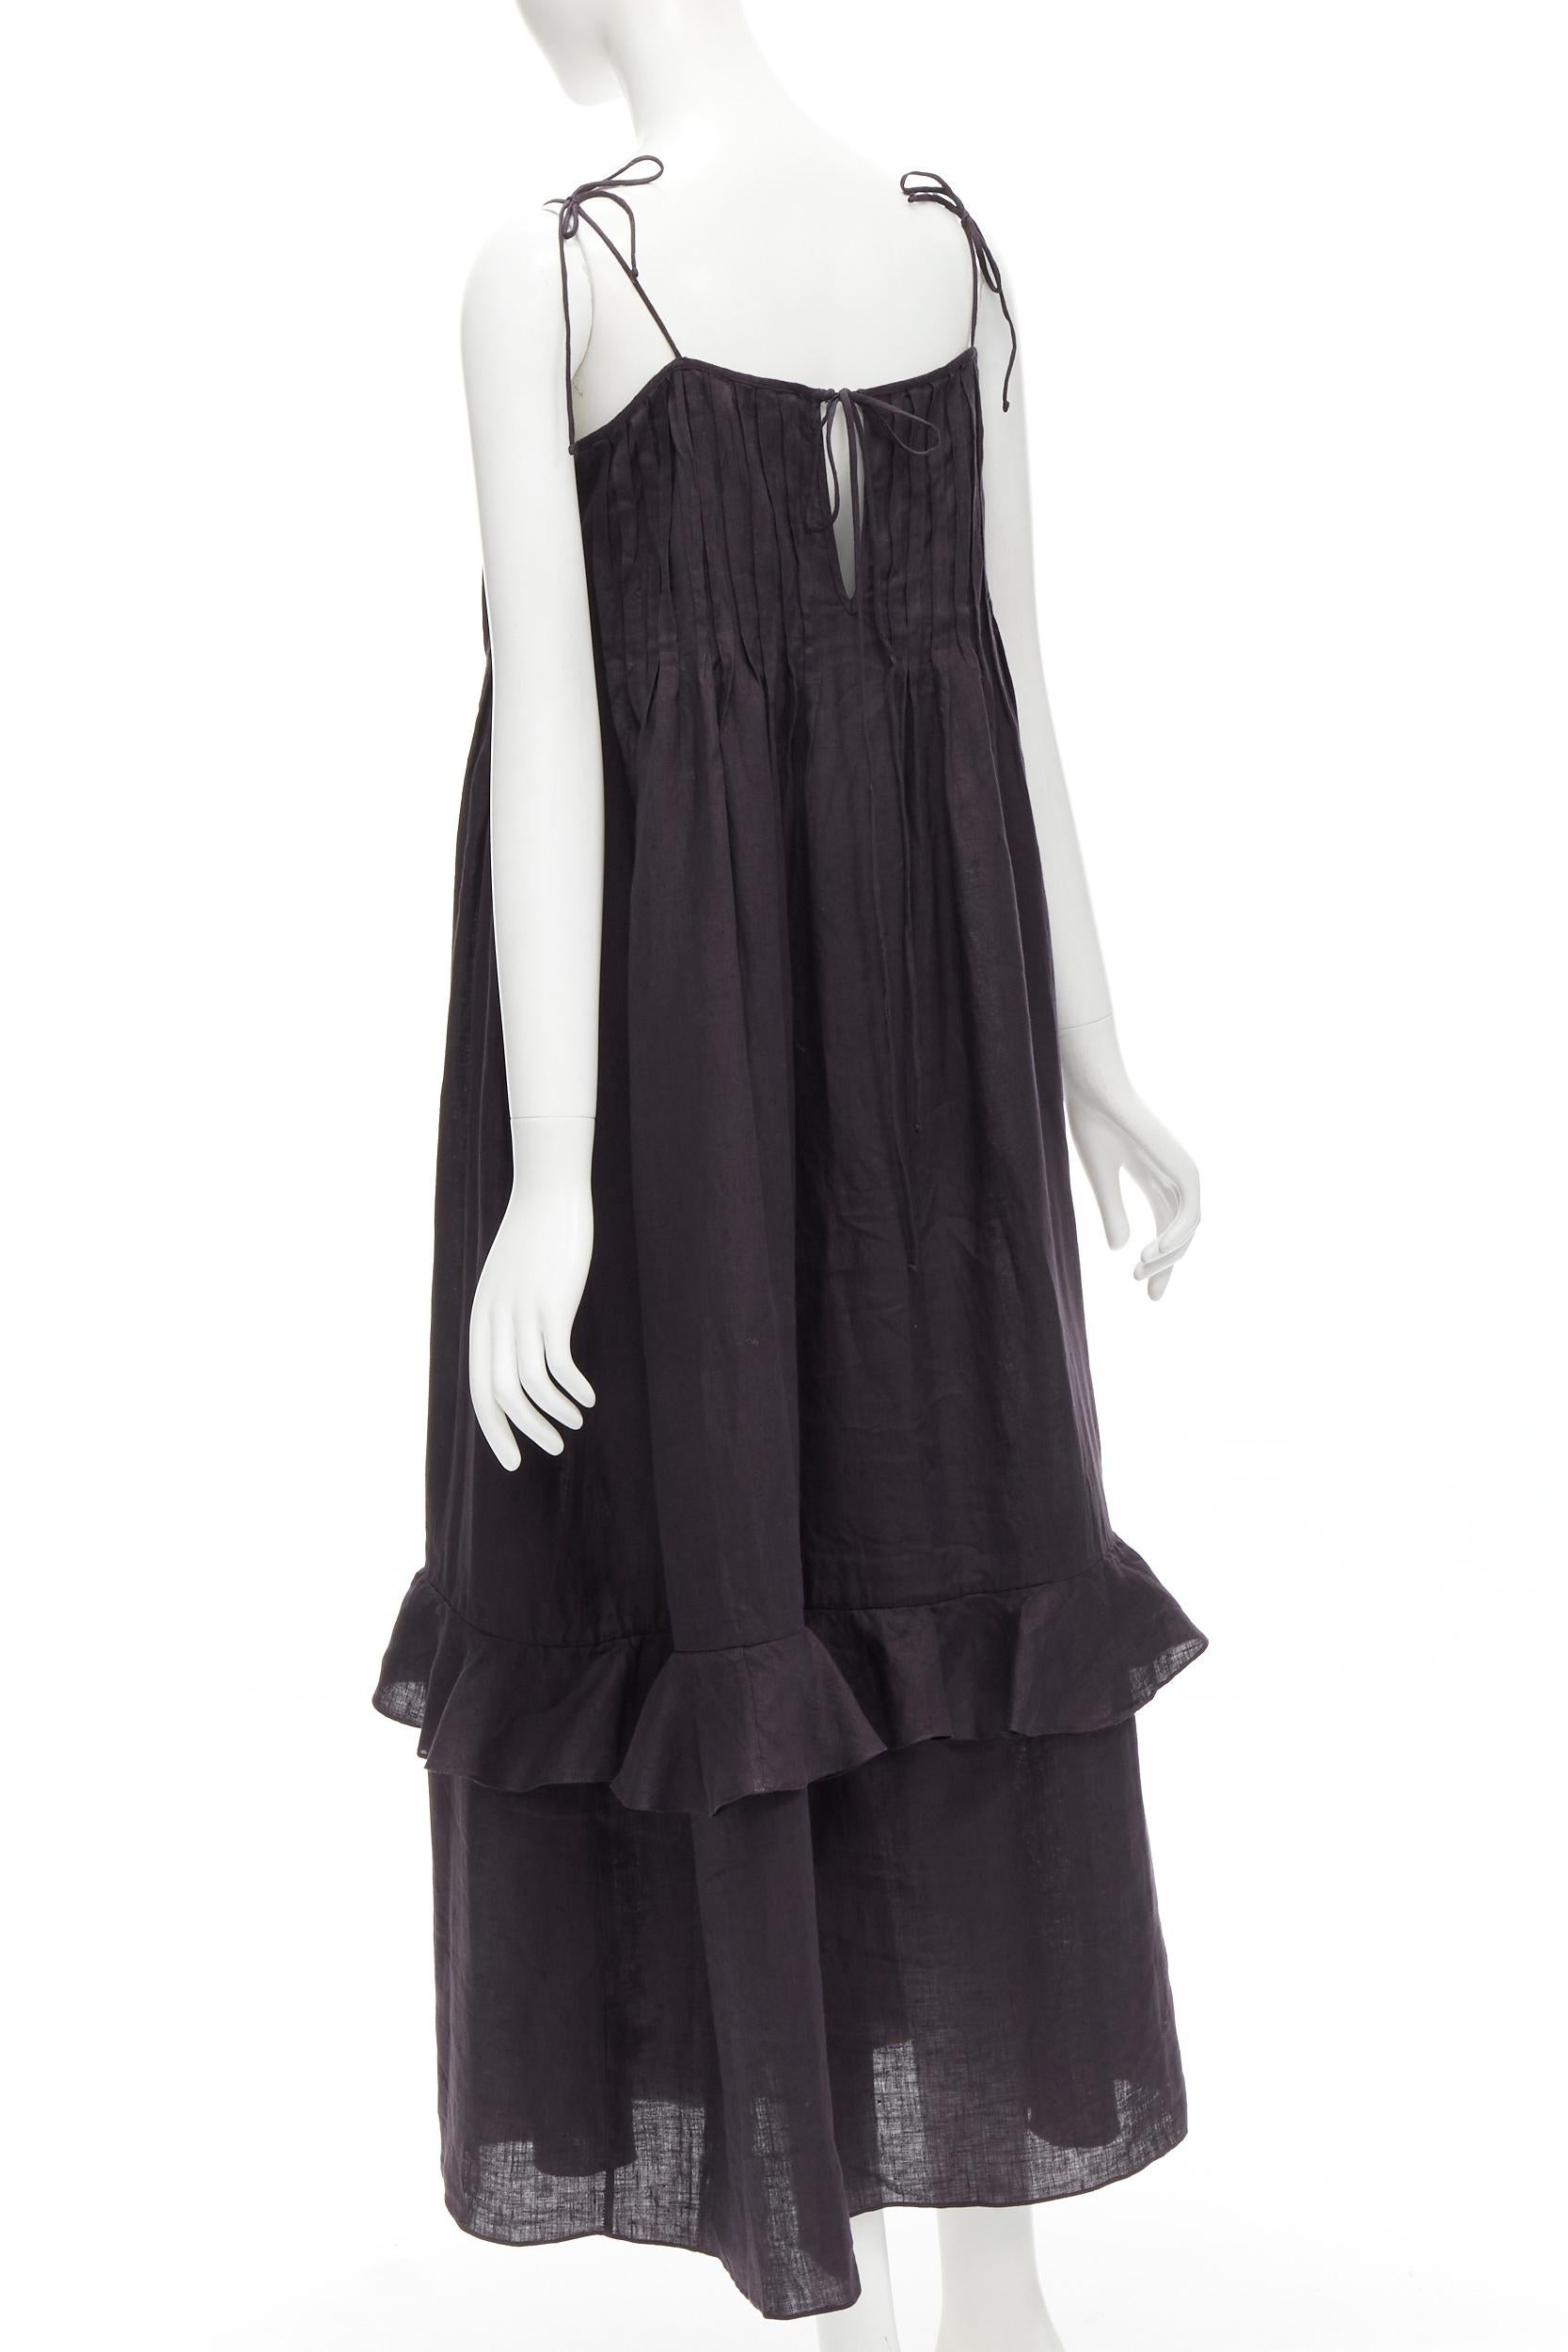 THREE GRACES LONDON black washed cotton pelated bust frill trim maxi dress UK8 S In Excellent Condition For Sale In Hong Kong, NT